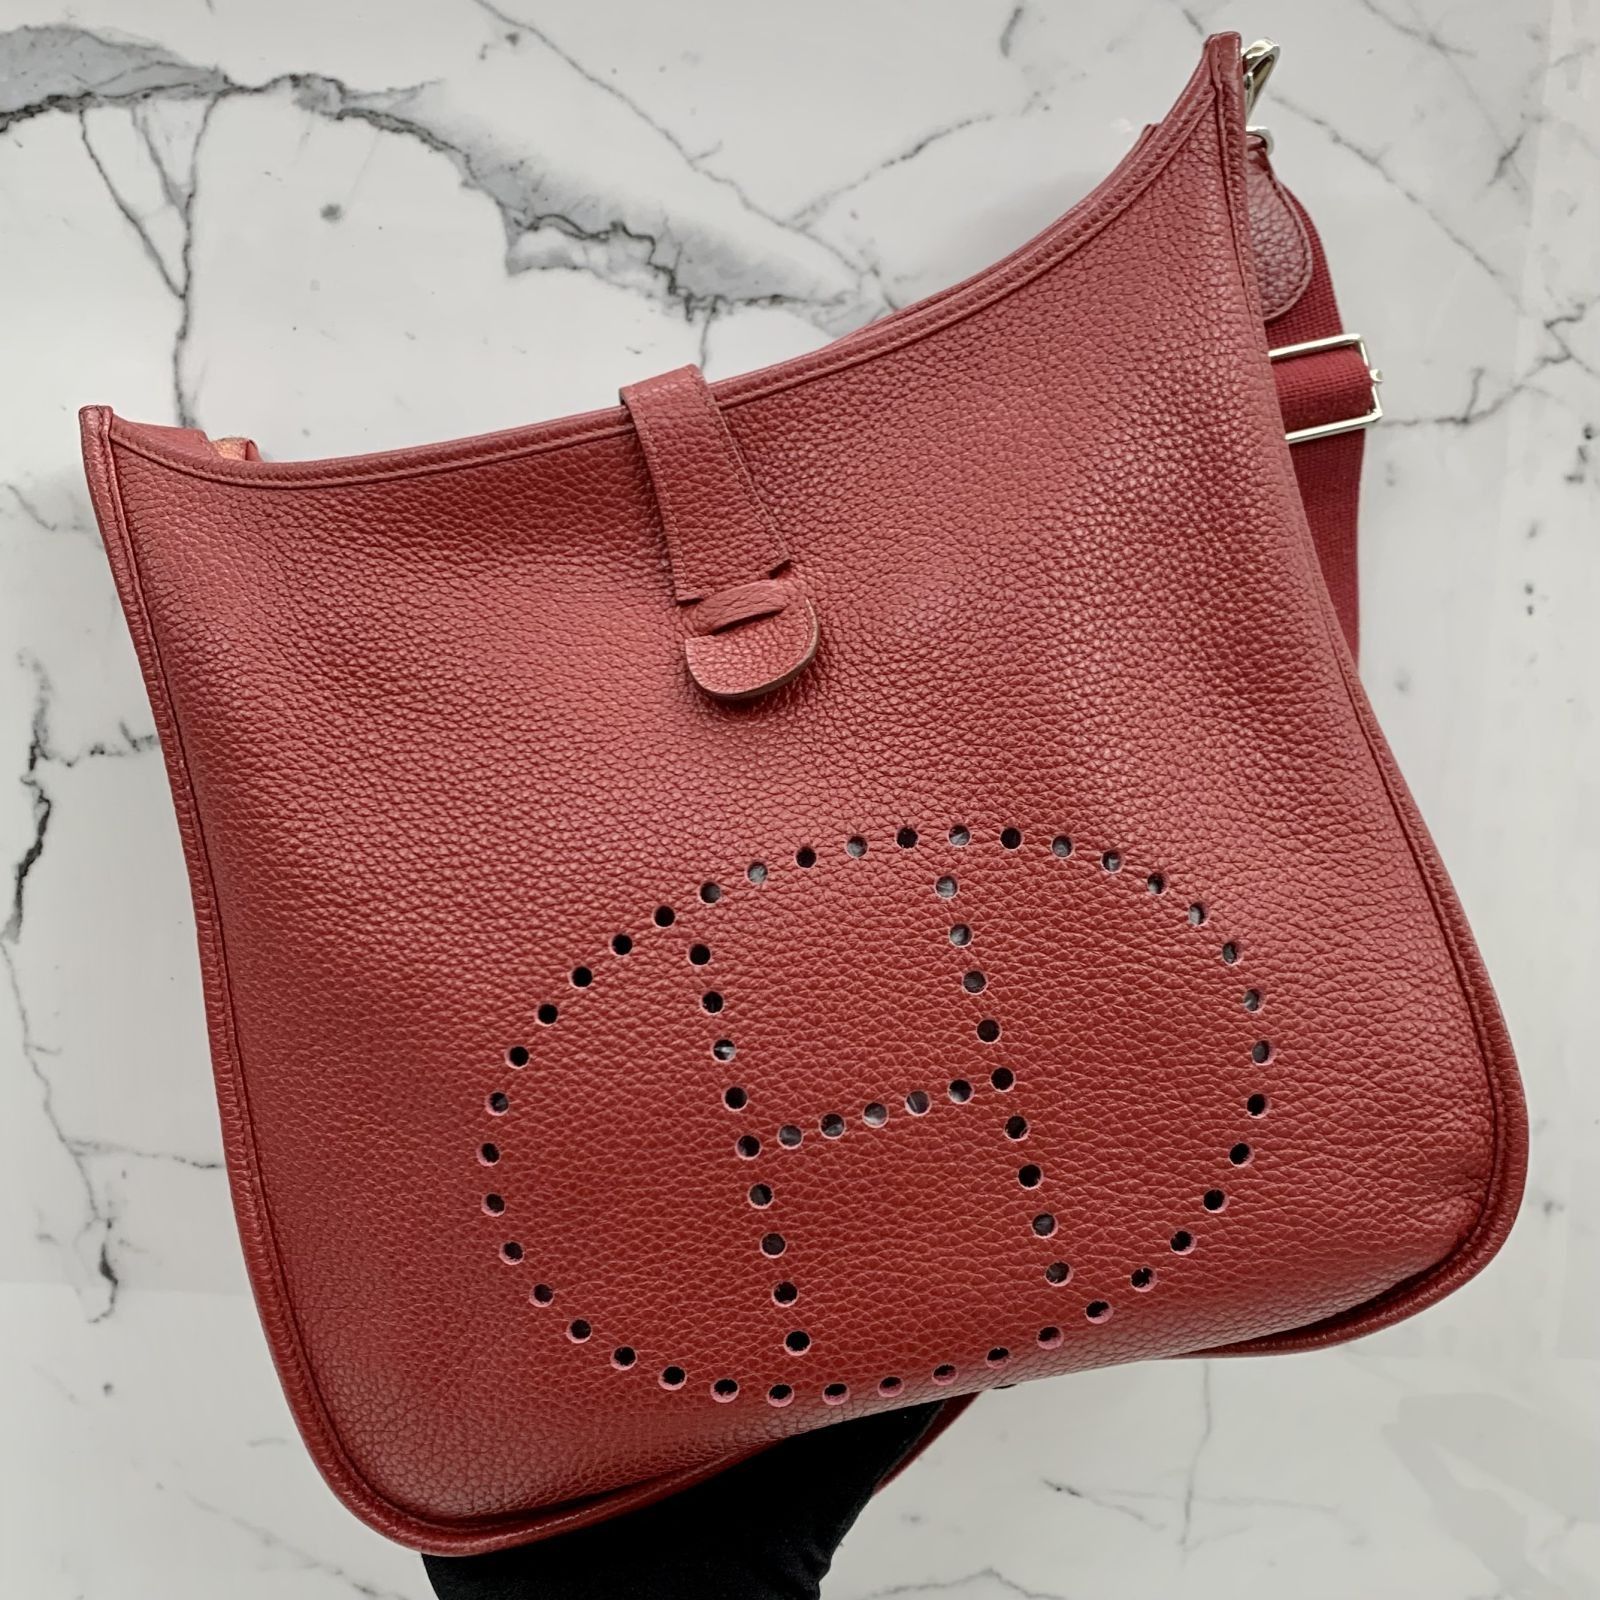 HERMÈS Evelyne III in red Clemence Leather Shoulder Bag – THE MODAOLOGY